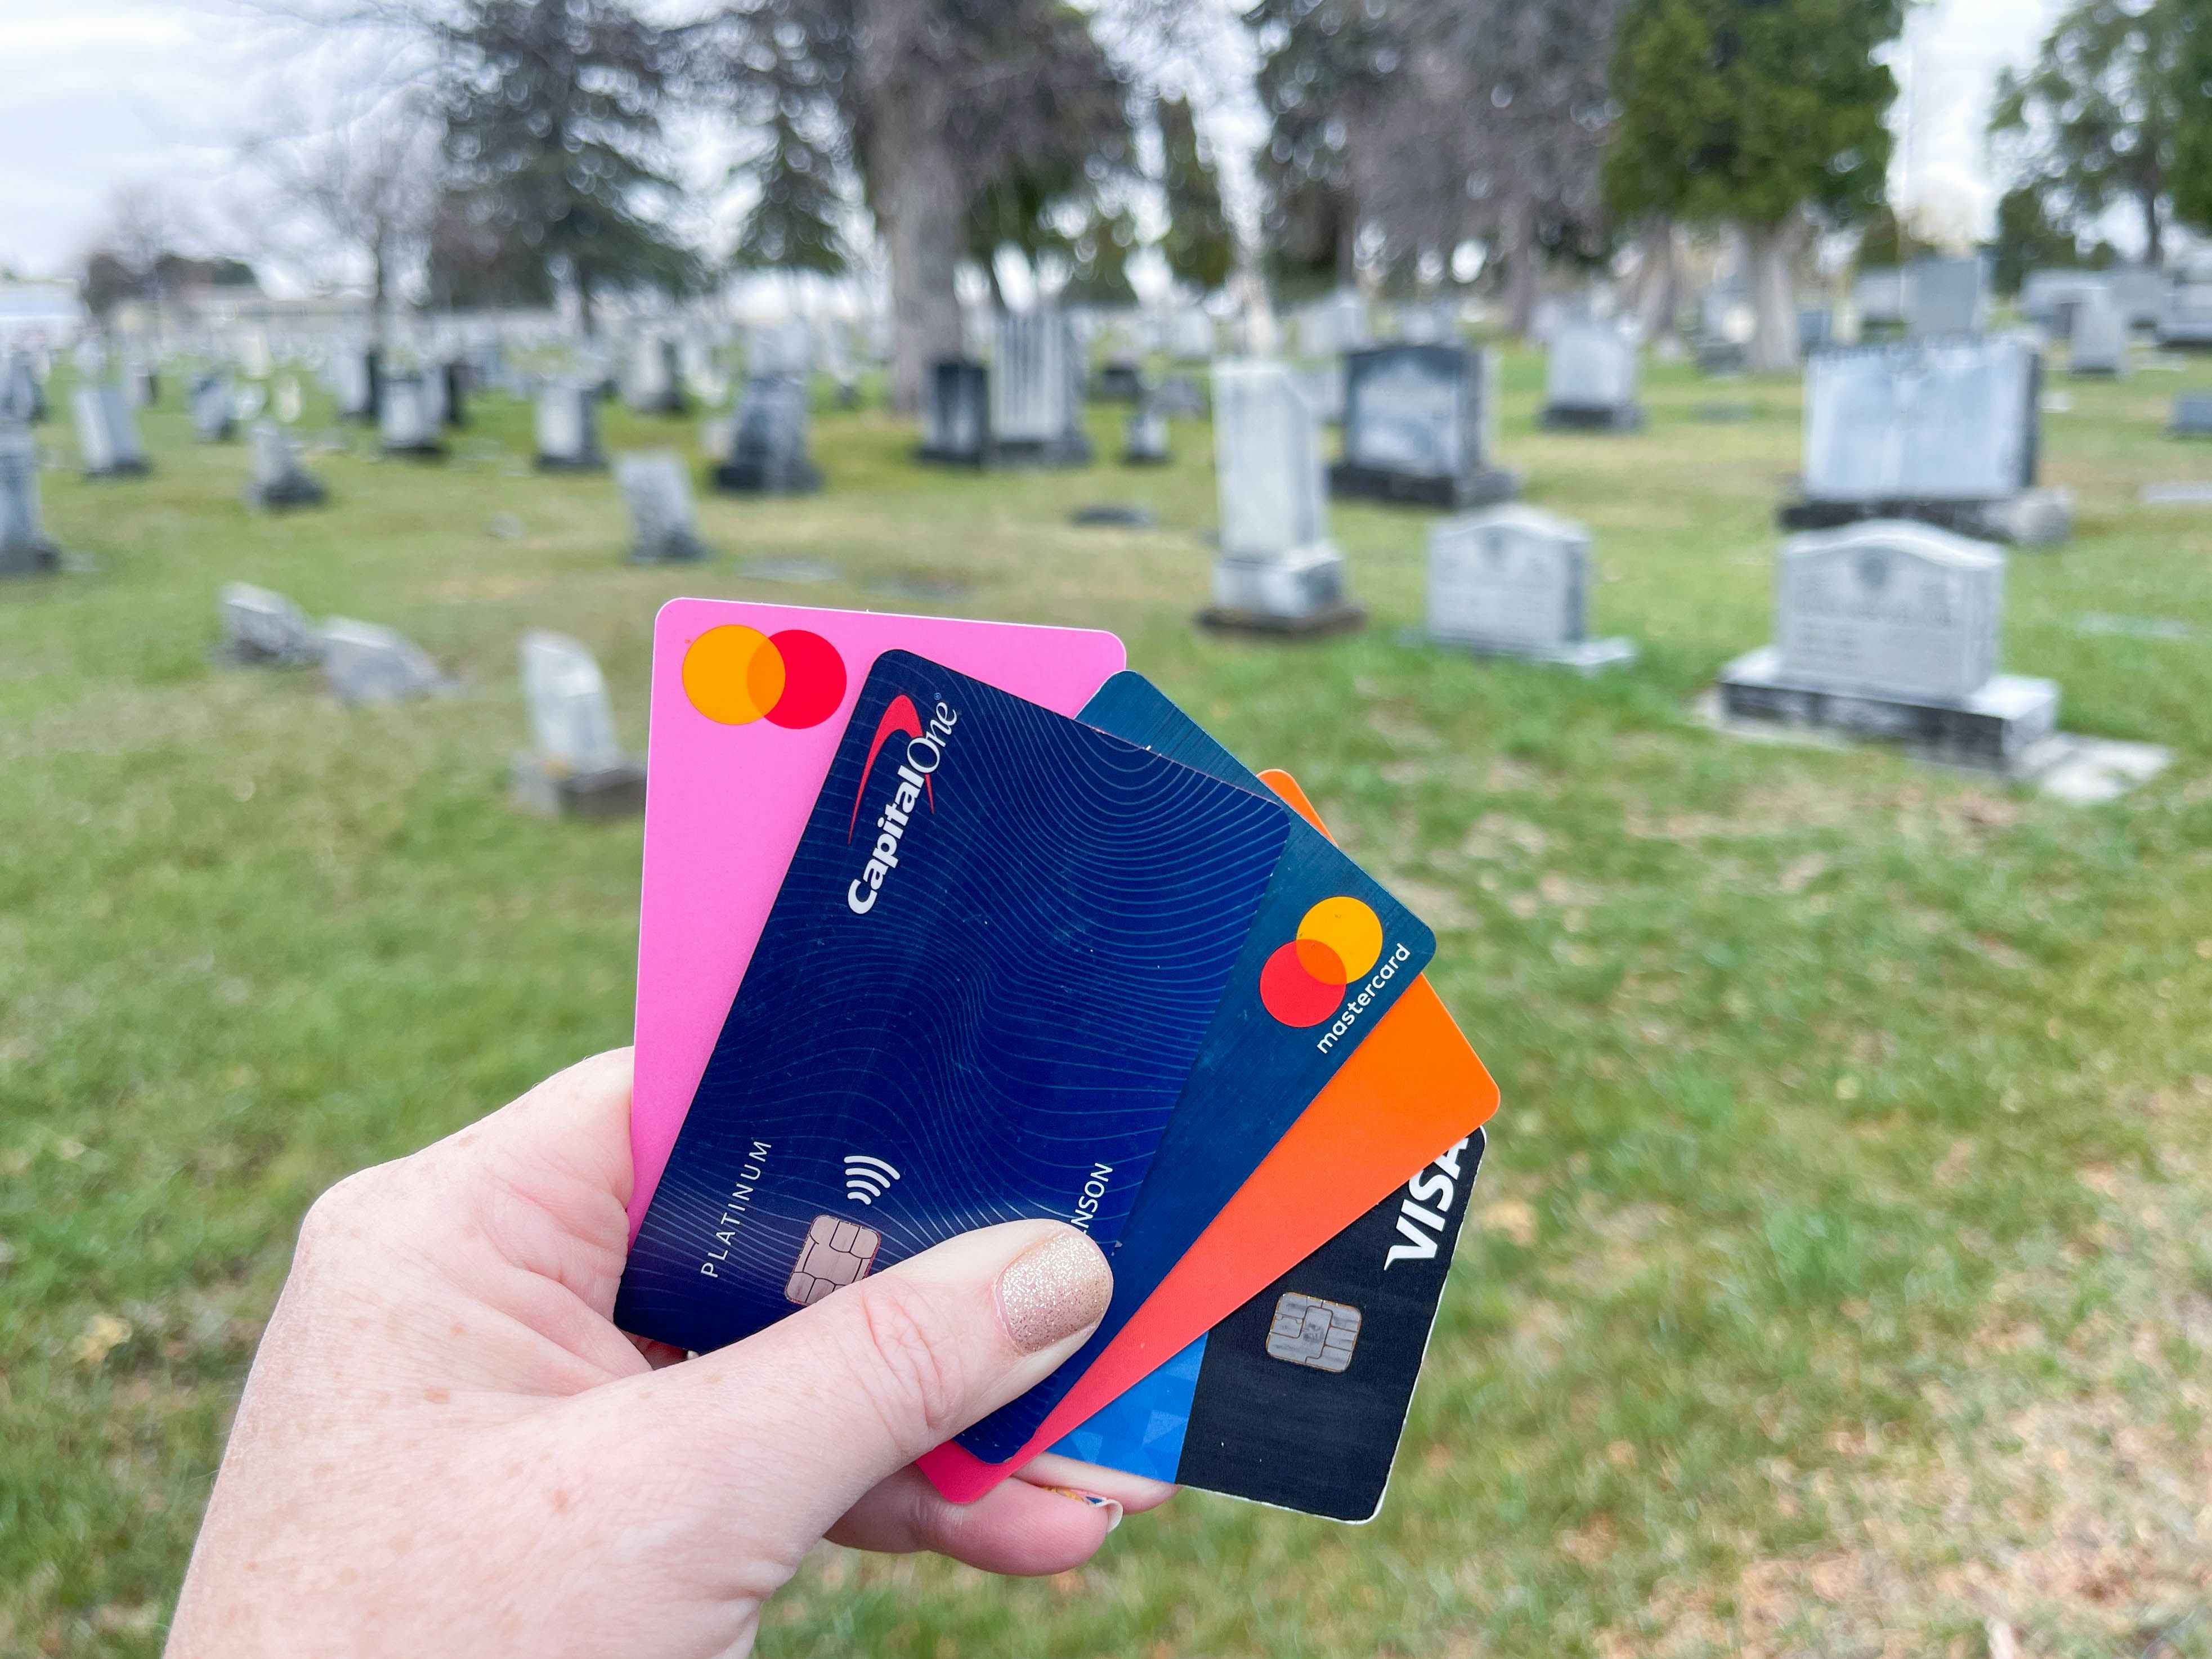 credit cards being held at a cemetery